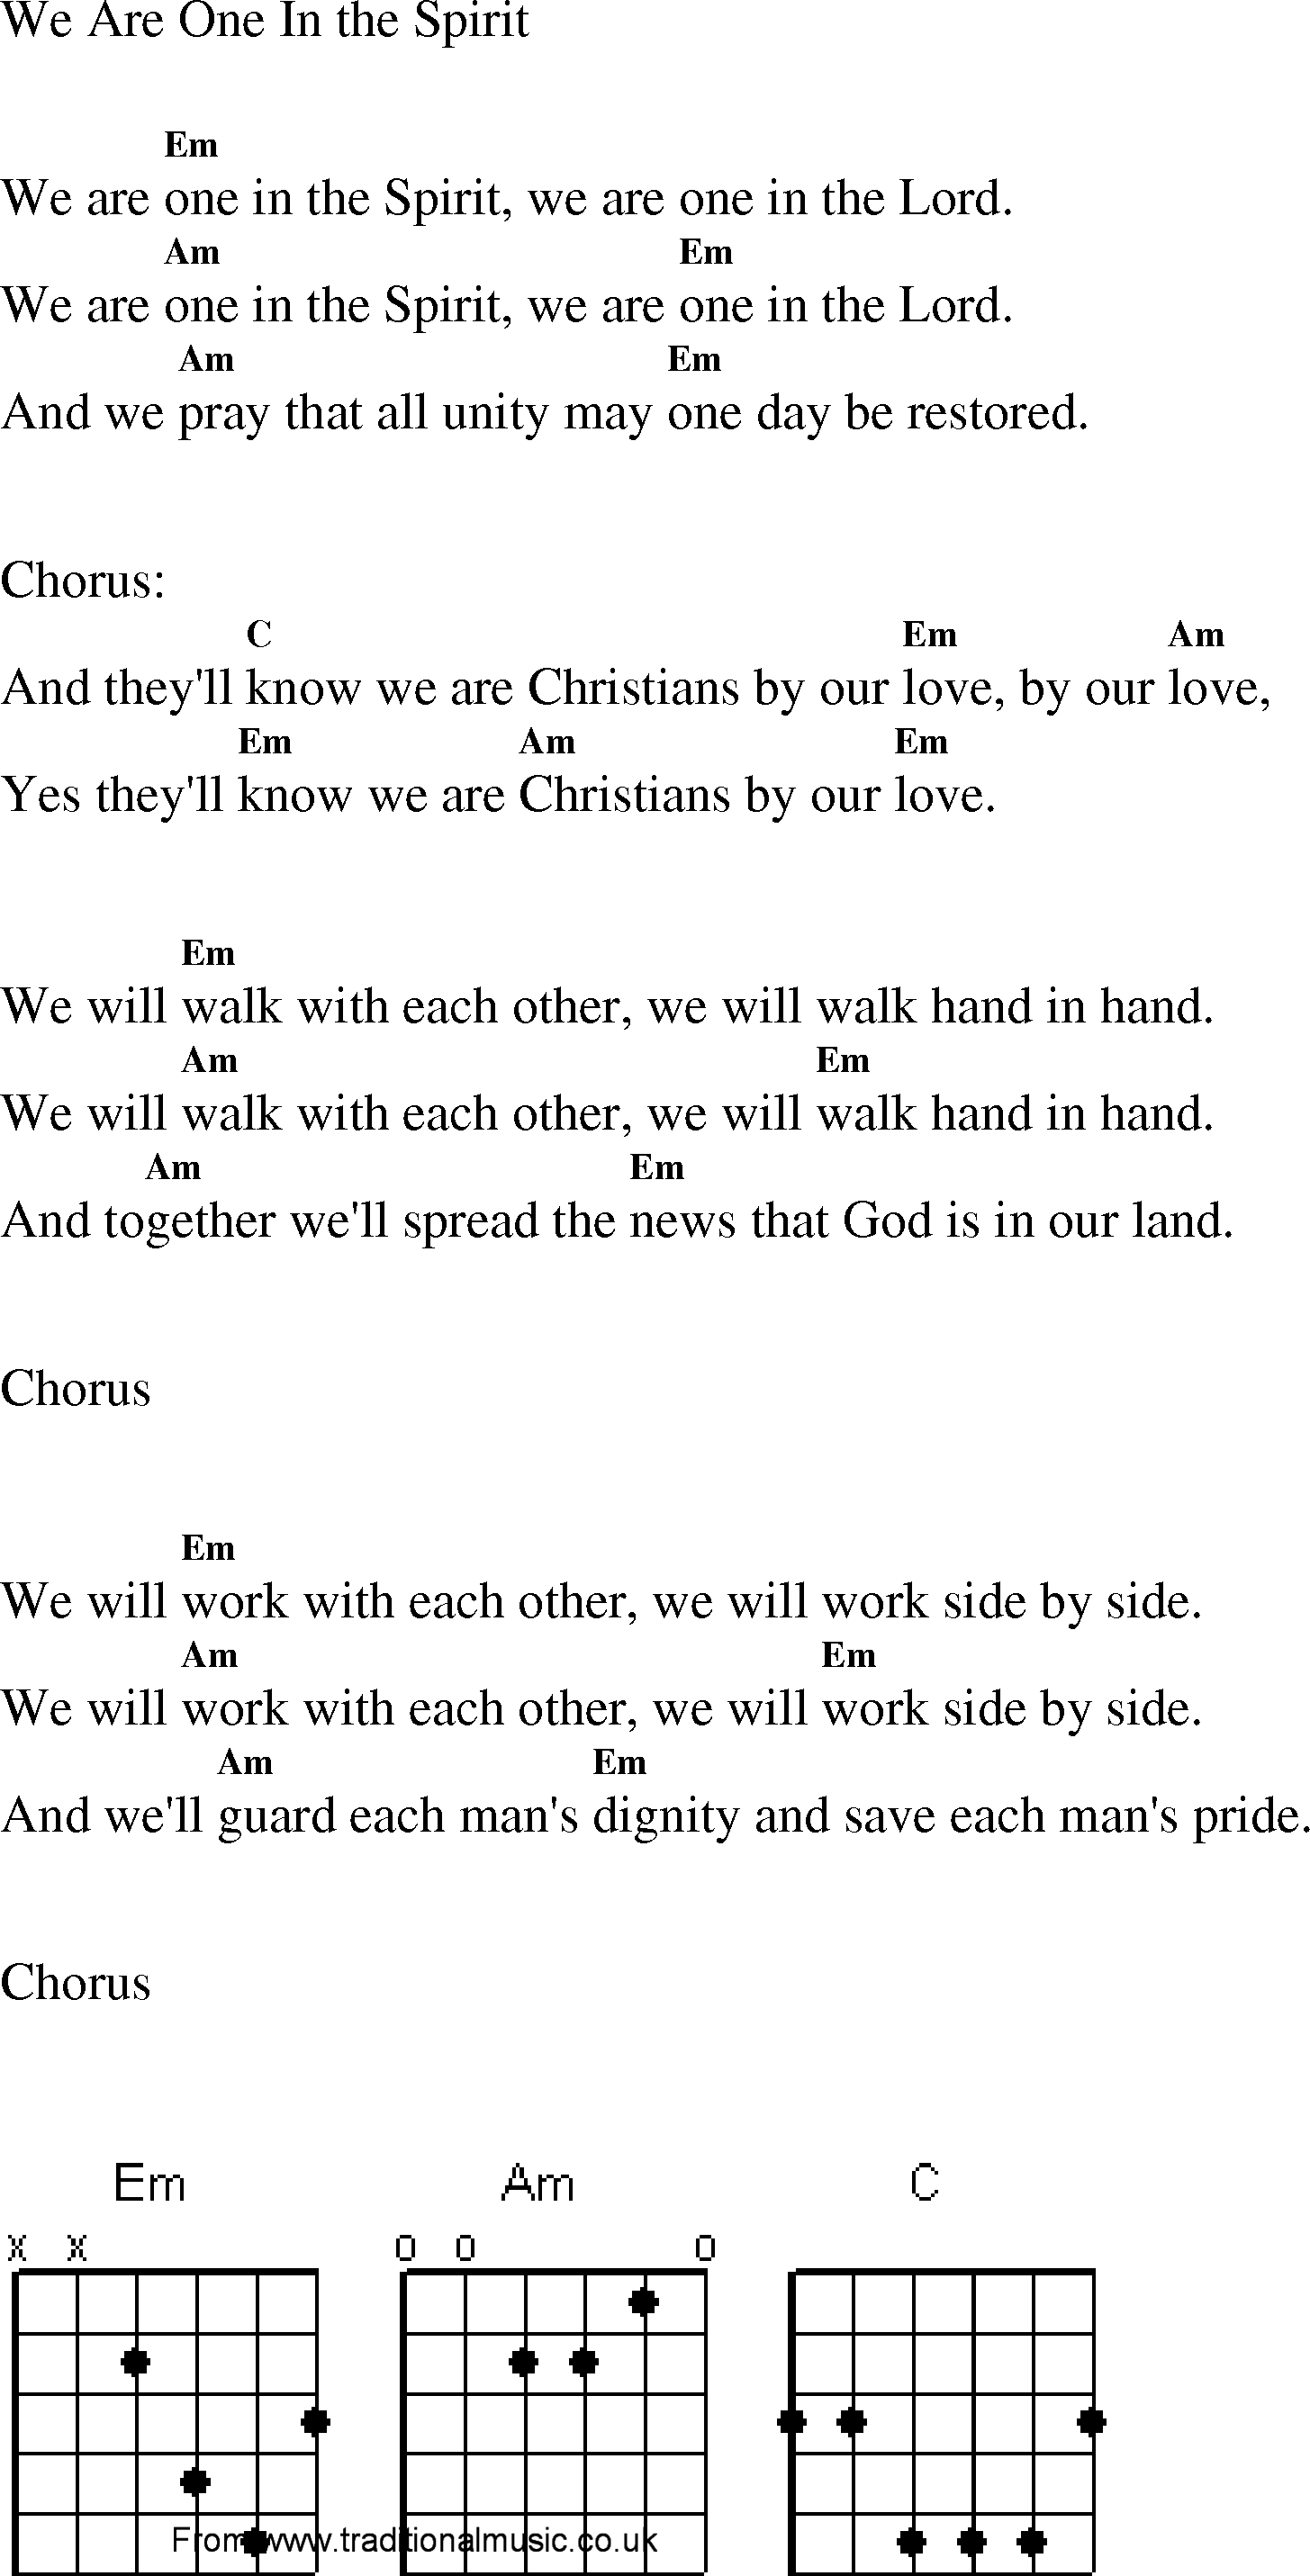 Gospel Song: we_are_one_in_the_spirit, lyrics and chords.